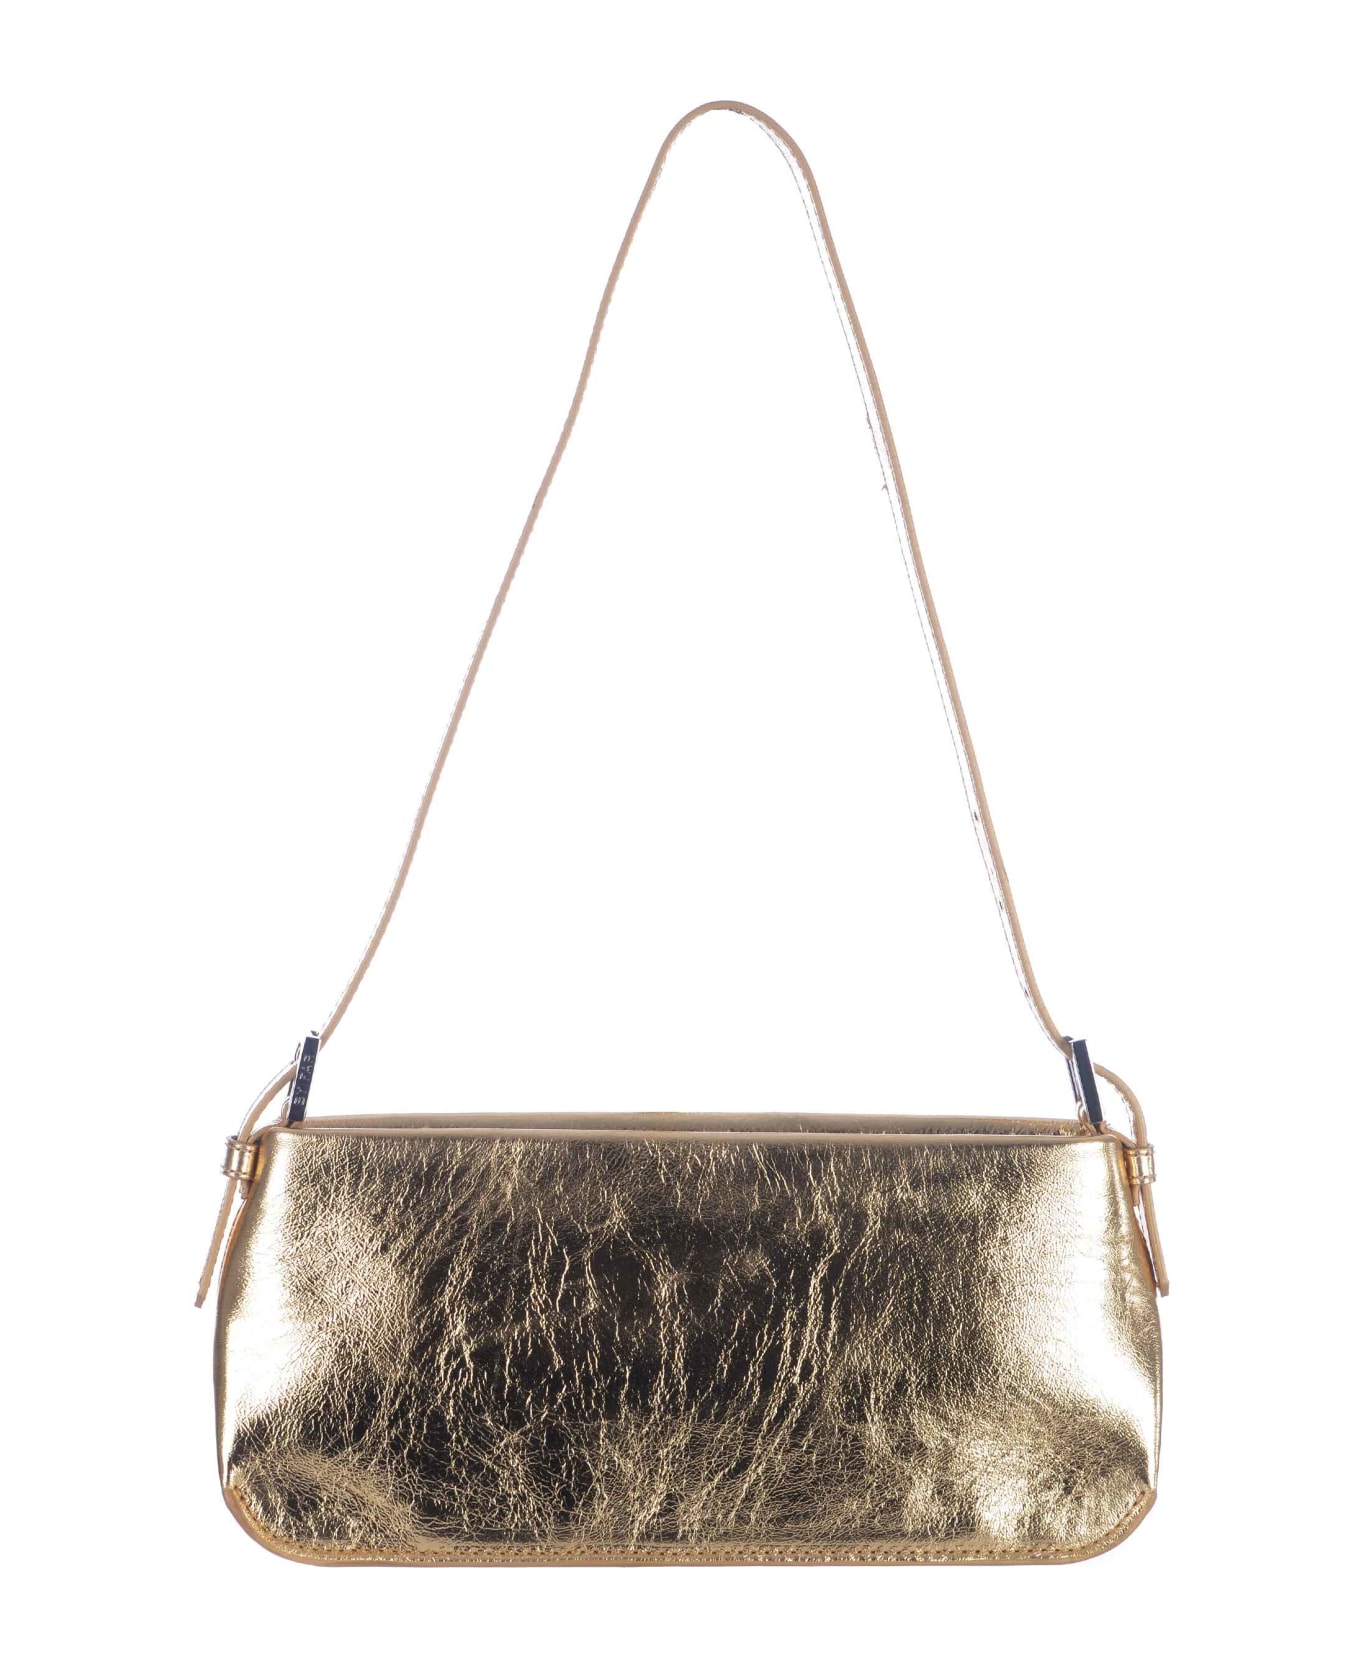 BY FAR Shoulder Bag By Far "dulce" In Metallic Leather - Pale gold ショルダーバッグ